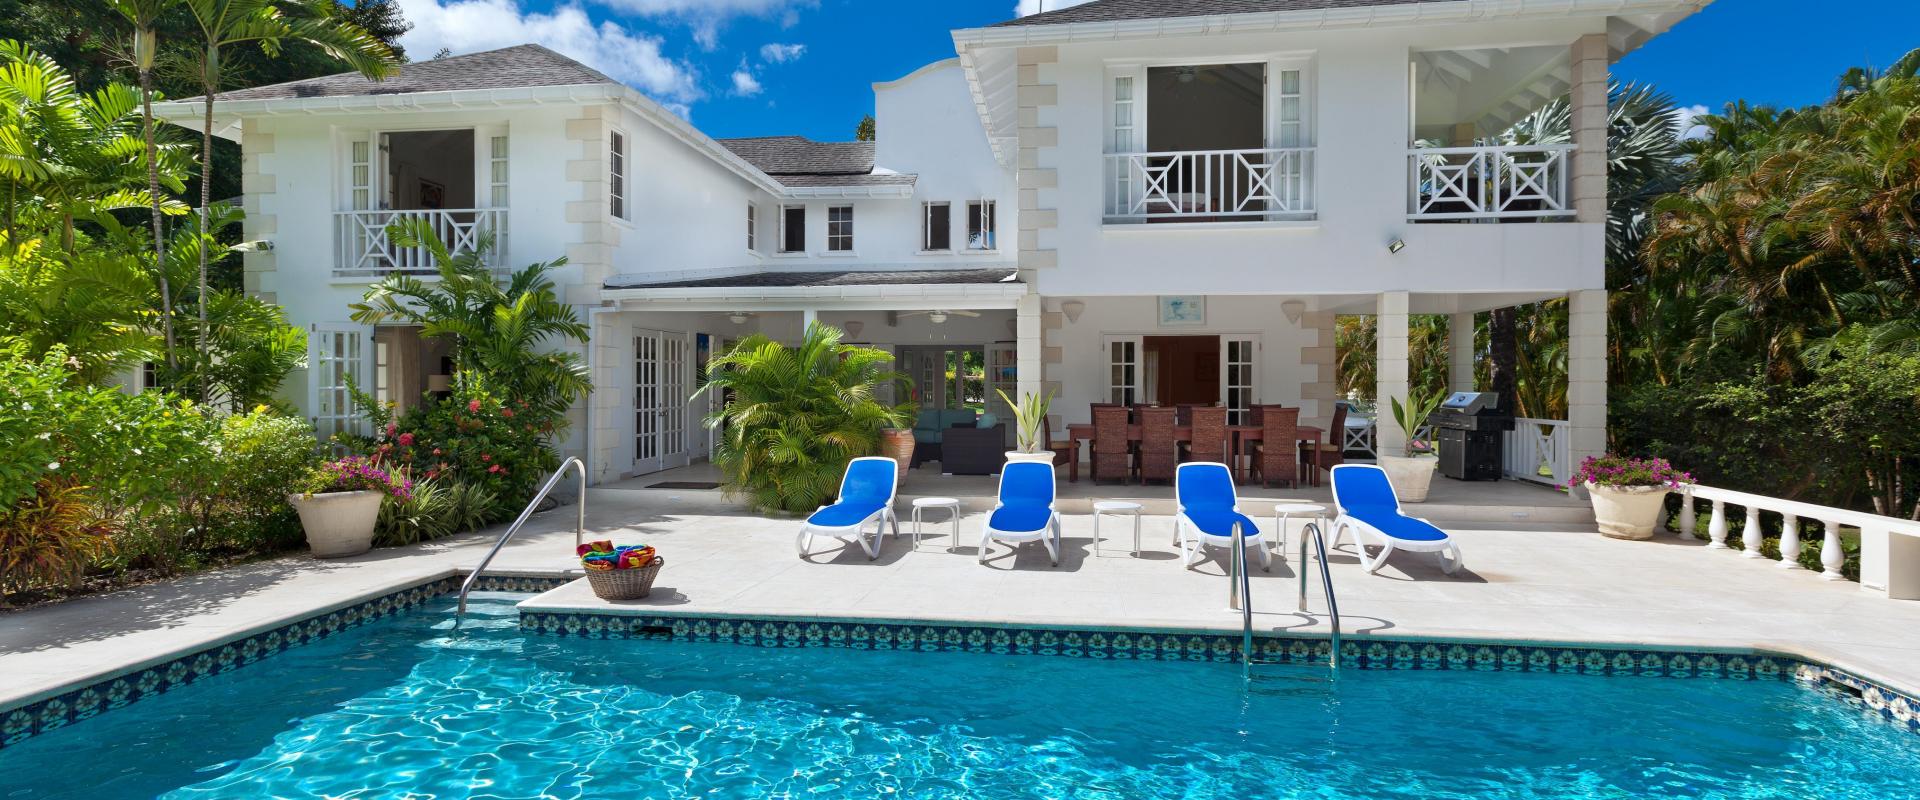 Sandy Lane Barbados Holiday Rental Rose of Sharon Swimming Pool and View of House